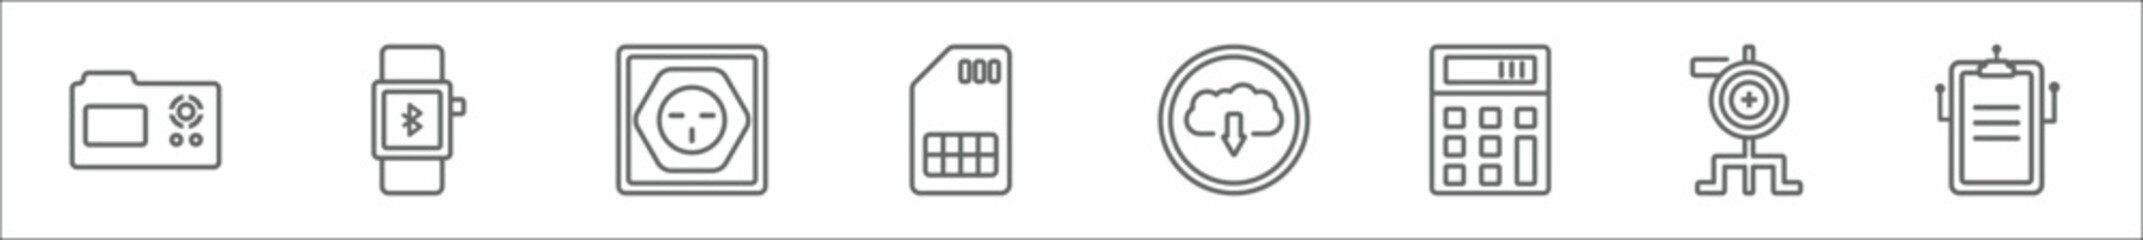 outline set of technology line icons. linear vector icons such as naensor, smart watch, round socket, big, download from virtual cloud, basic calculator, pitching hine, summary